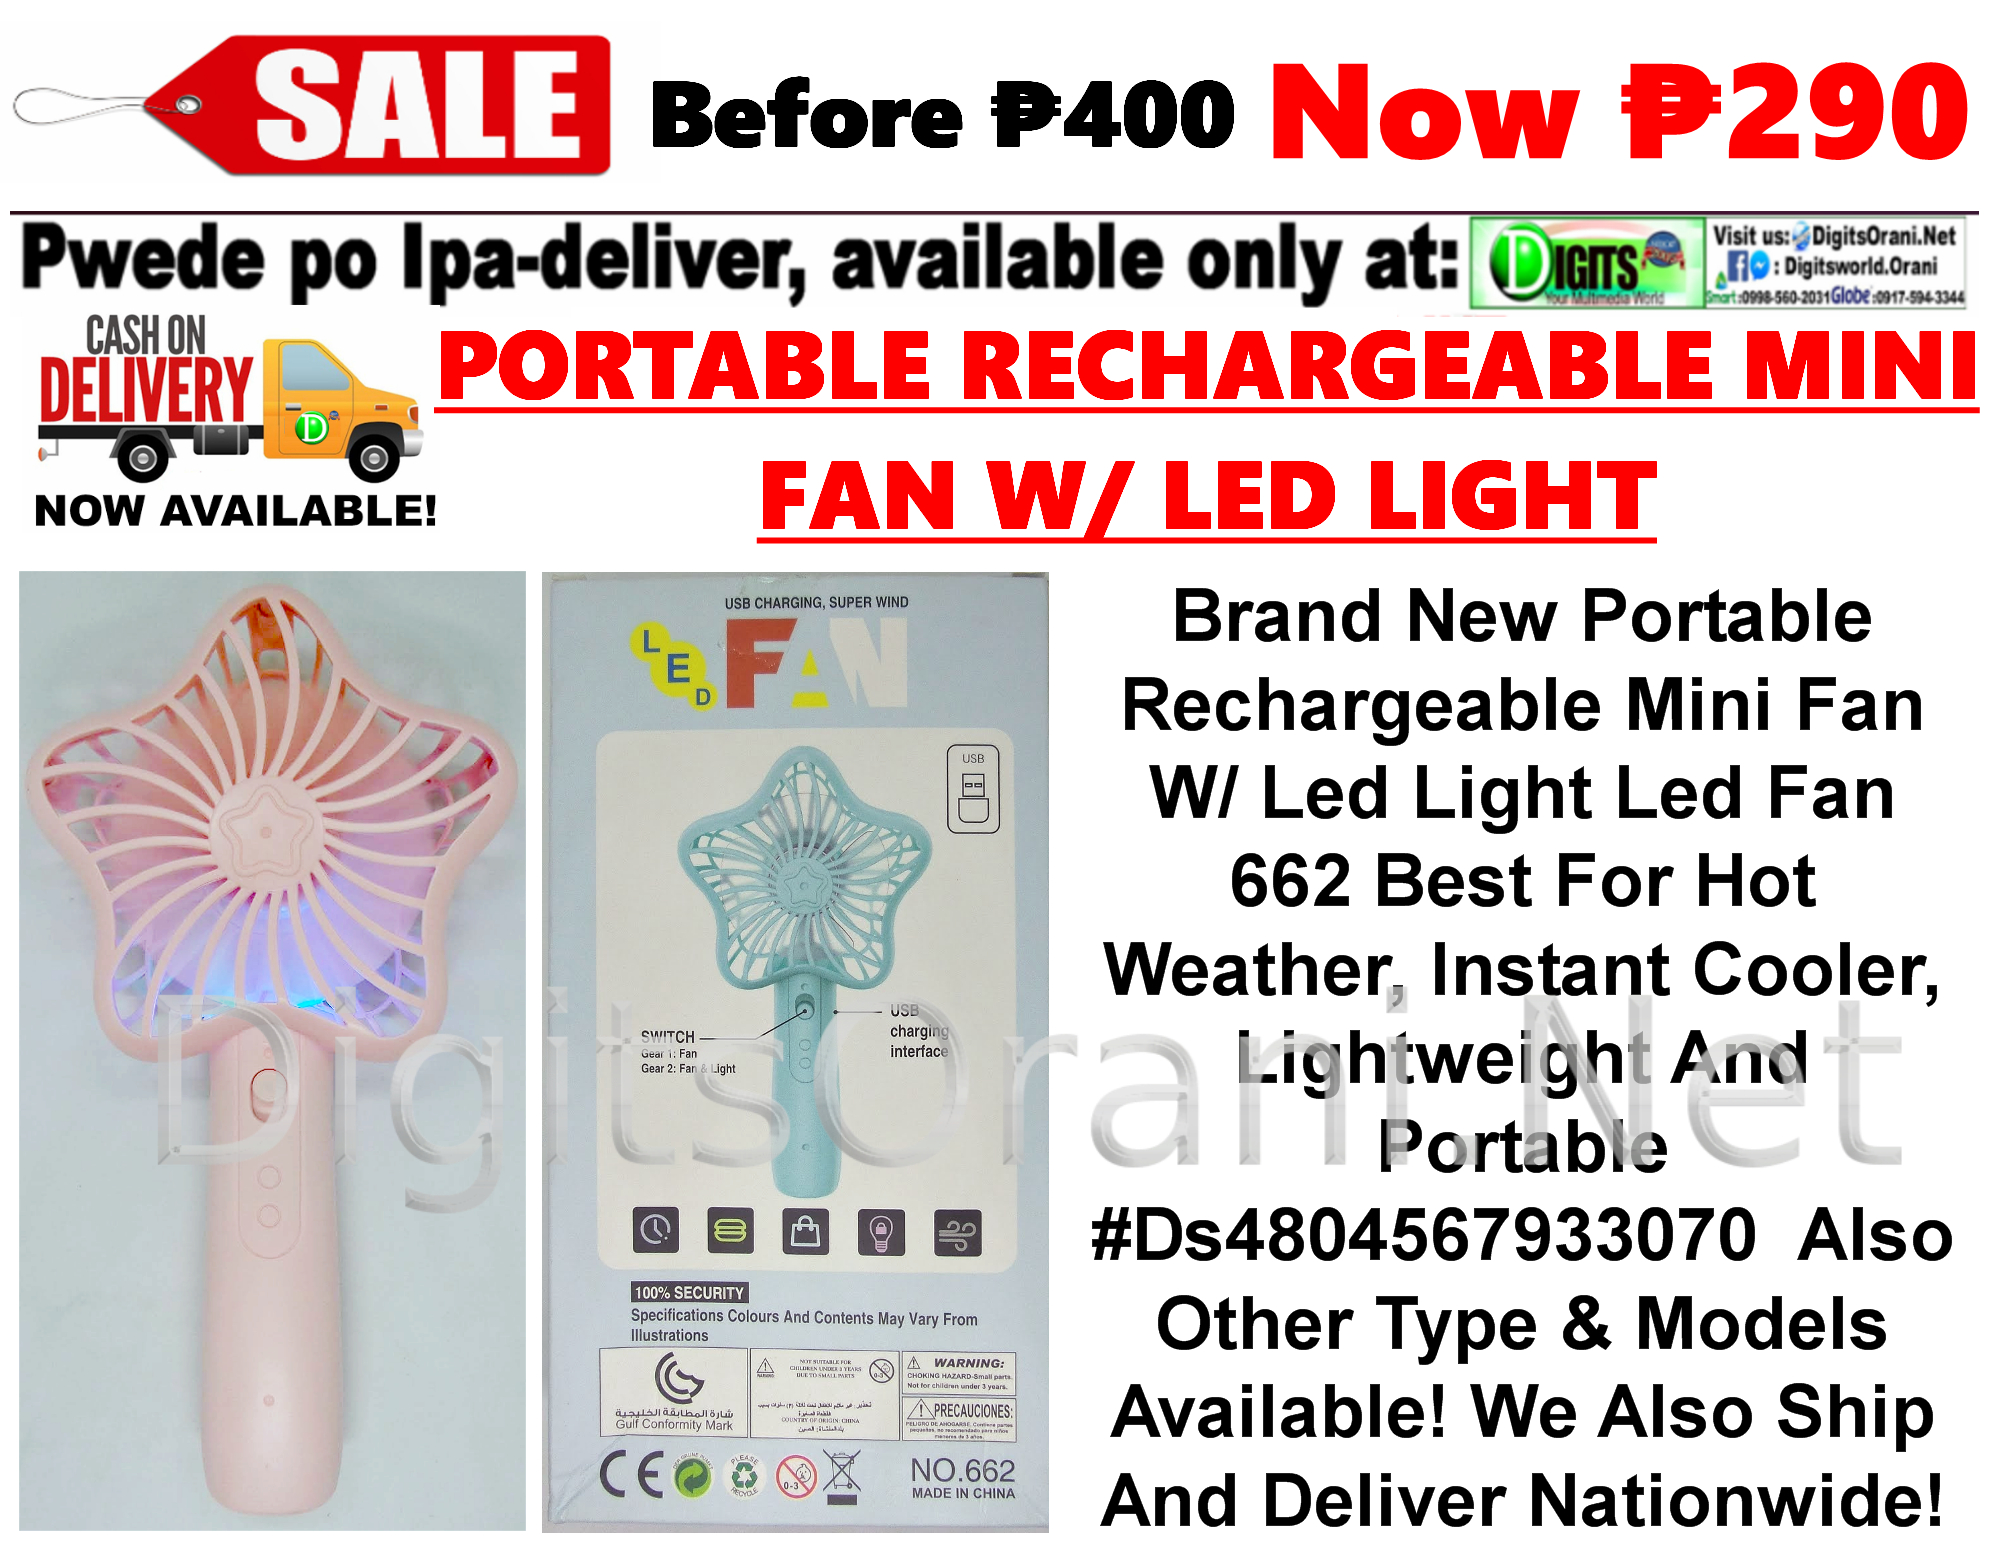 Portable Rechargeable Mini Fan W Led Light Led Fan 662 Best For Hot Weather Instant Cooler Lightweight And Portable Ds4804567933070 regarding measurements 1998 X 1555